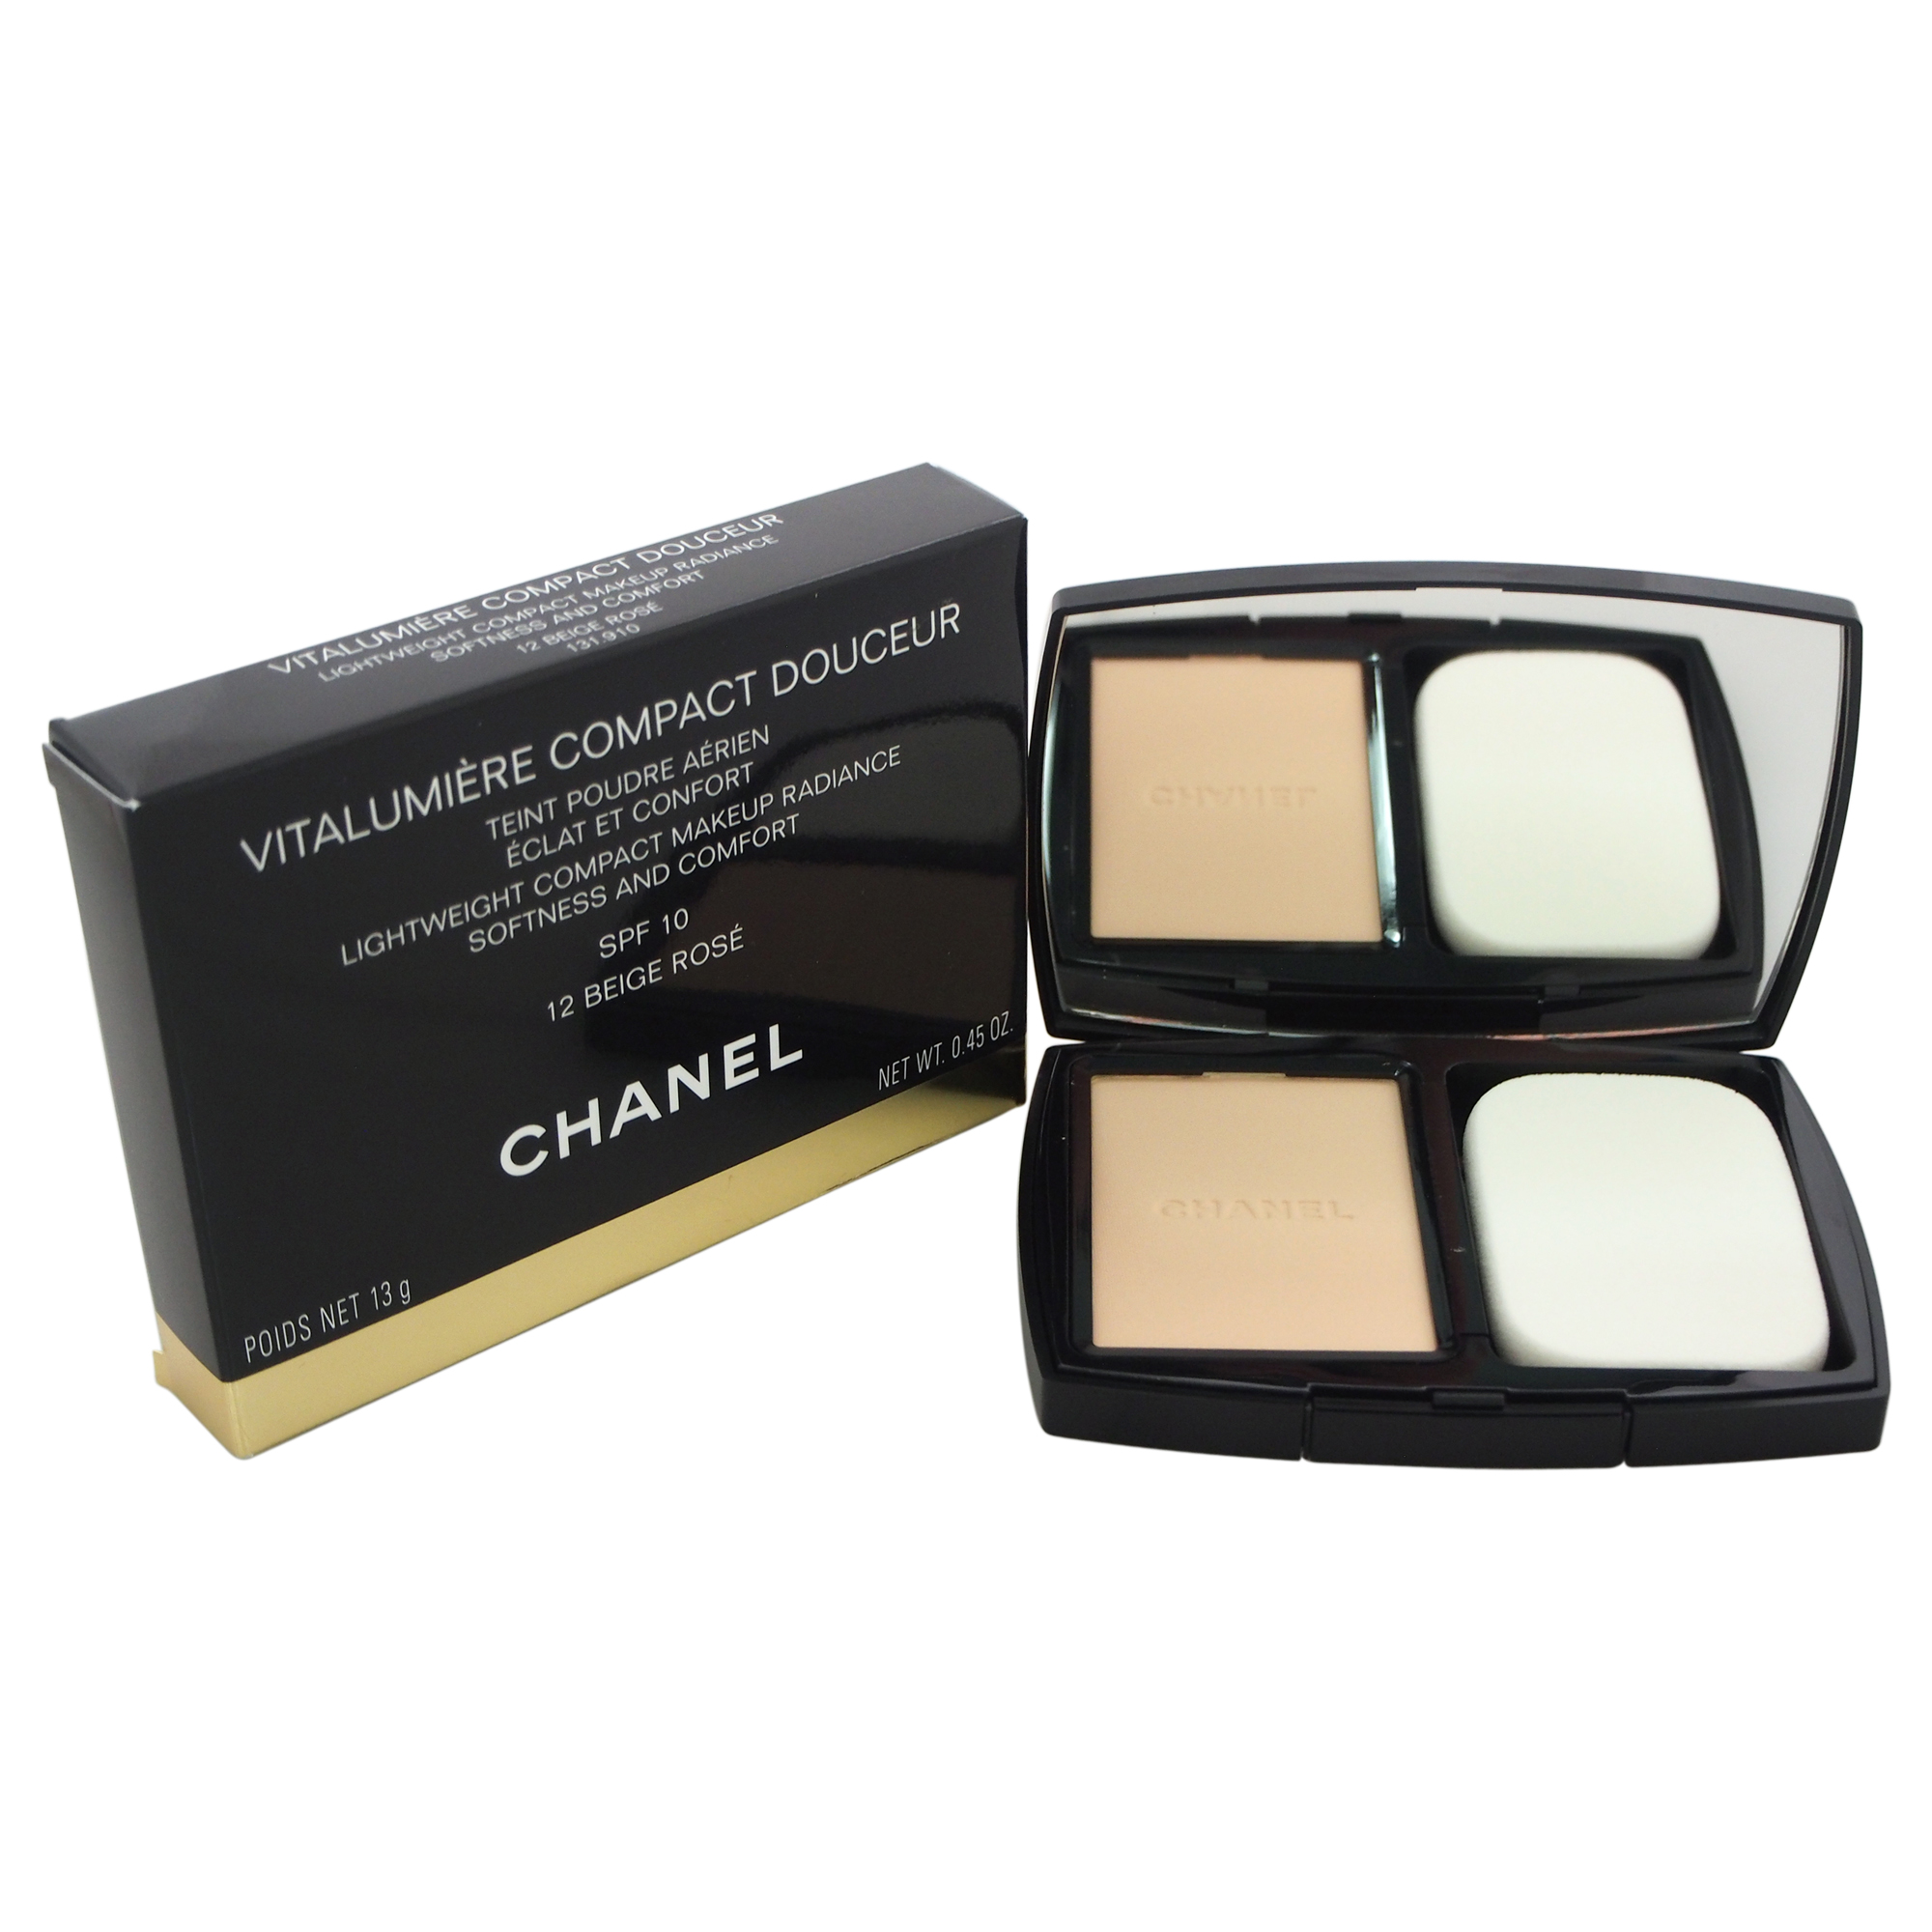 EAN 3145891319101 product image for Vitalumiere Compact Douceur Lightweight Compact Makeup SPF 10 - # 12 Beige Rose  | upcitemdb.com